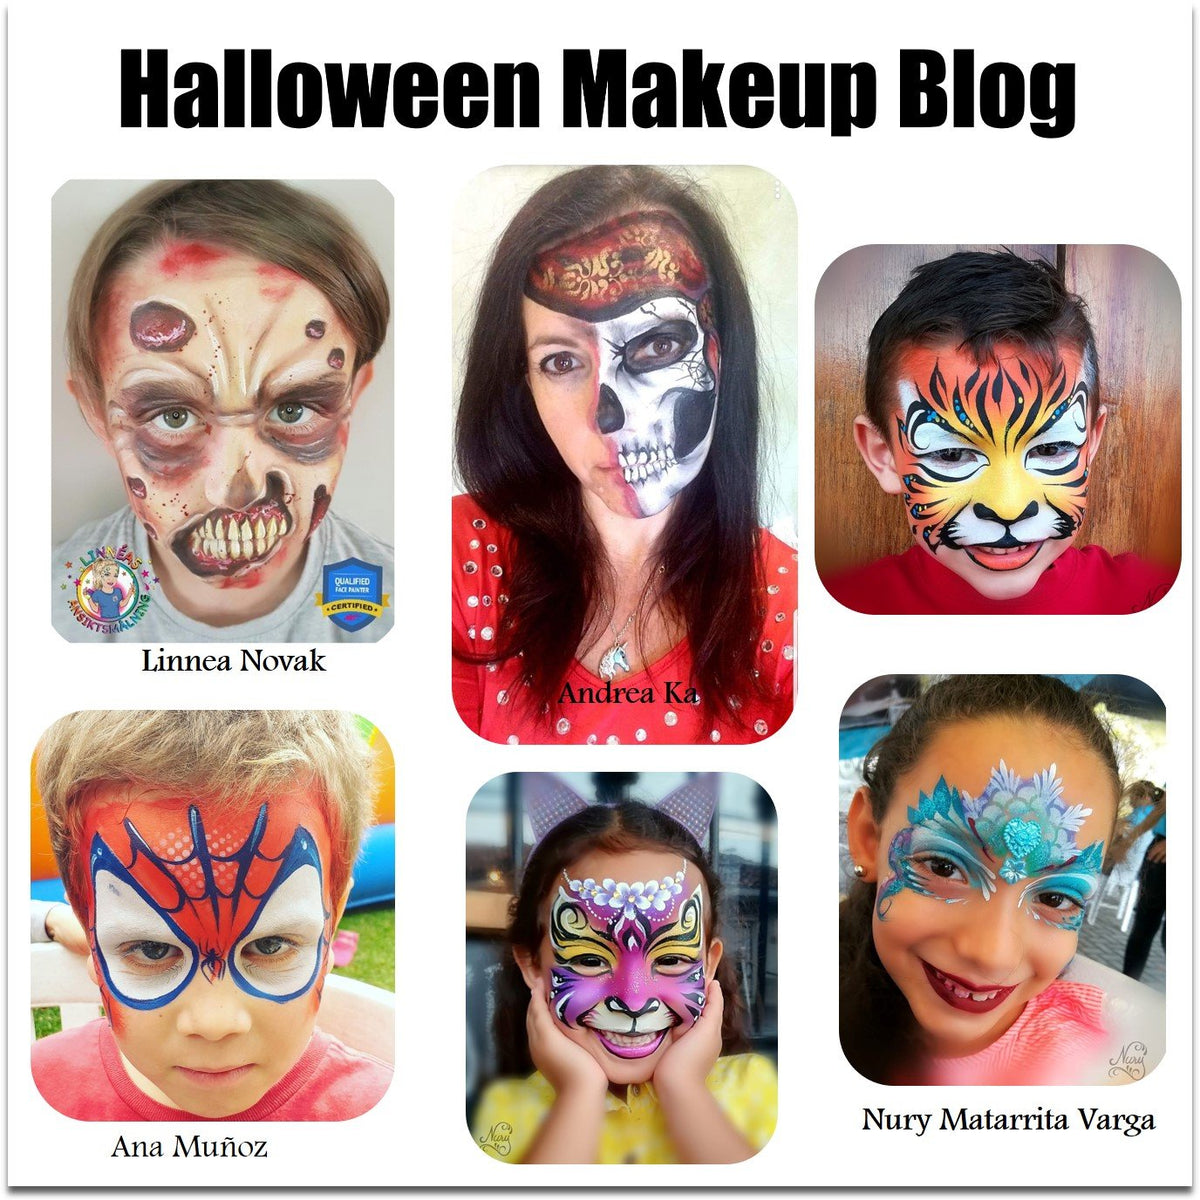 30 Quick & Easy Face Paint Ideas For Kids: Tutorials & Videos